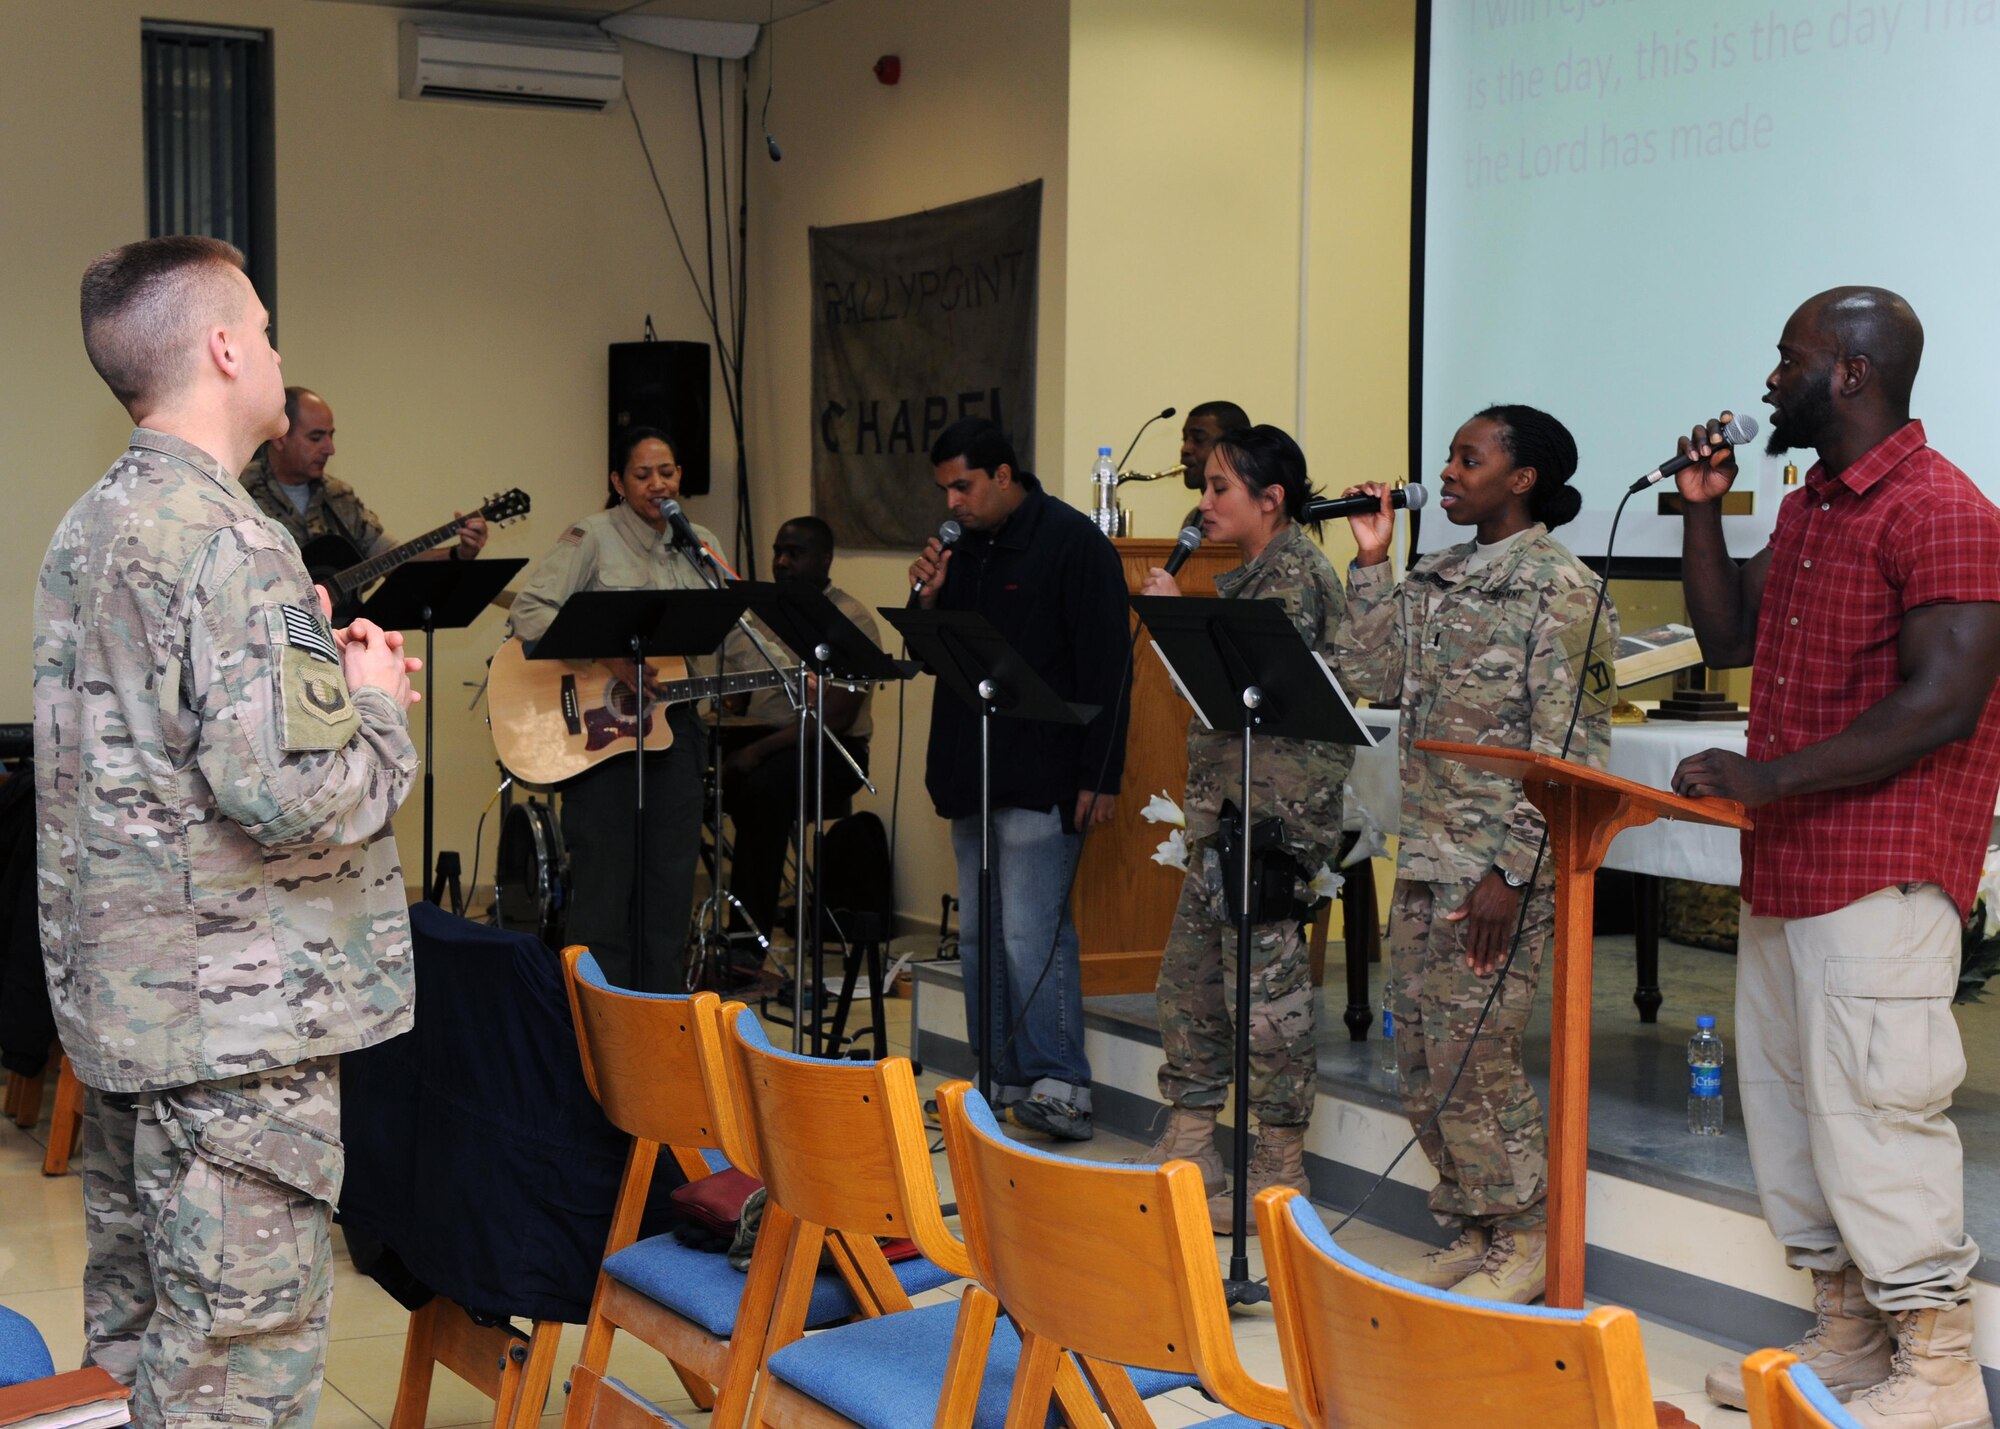 U.S. Air Force Maj. William Braswell, 455th Air Expeditionary Wing chaplain, listens to the praise and worship team prior to conducting an evening church service during a Religious Support Team visit Feb. 15, 2015 at Hamid Karzai International Airport in Kabul. Braswell, accompanied by U.S. Air Force Tech. Sgt. Aleric Hebert, 455 AEW chaplain assistant, travels throughout the U.S. Air Force Central Command Area of Responsibility engaging with Airmen and conducting church services to ensure deployed servicemembers are spiritually fit to fight.(U.S. Air Force photo by Staff Sgt. Whitney Amstutz/released)